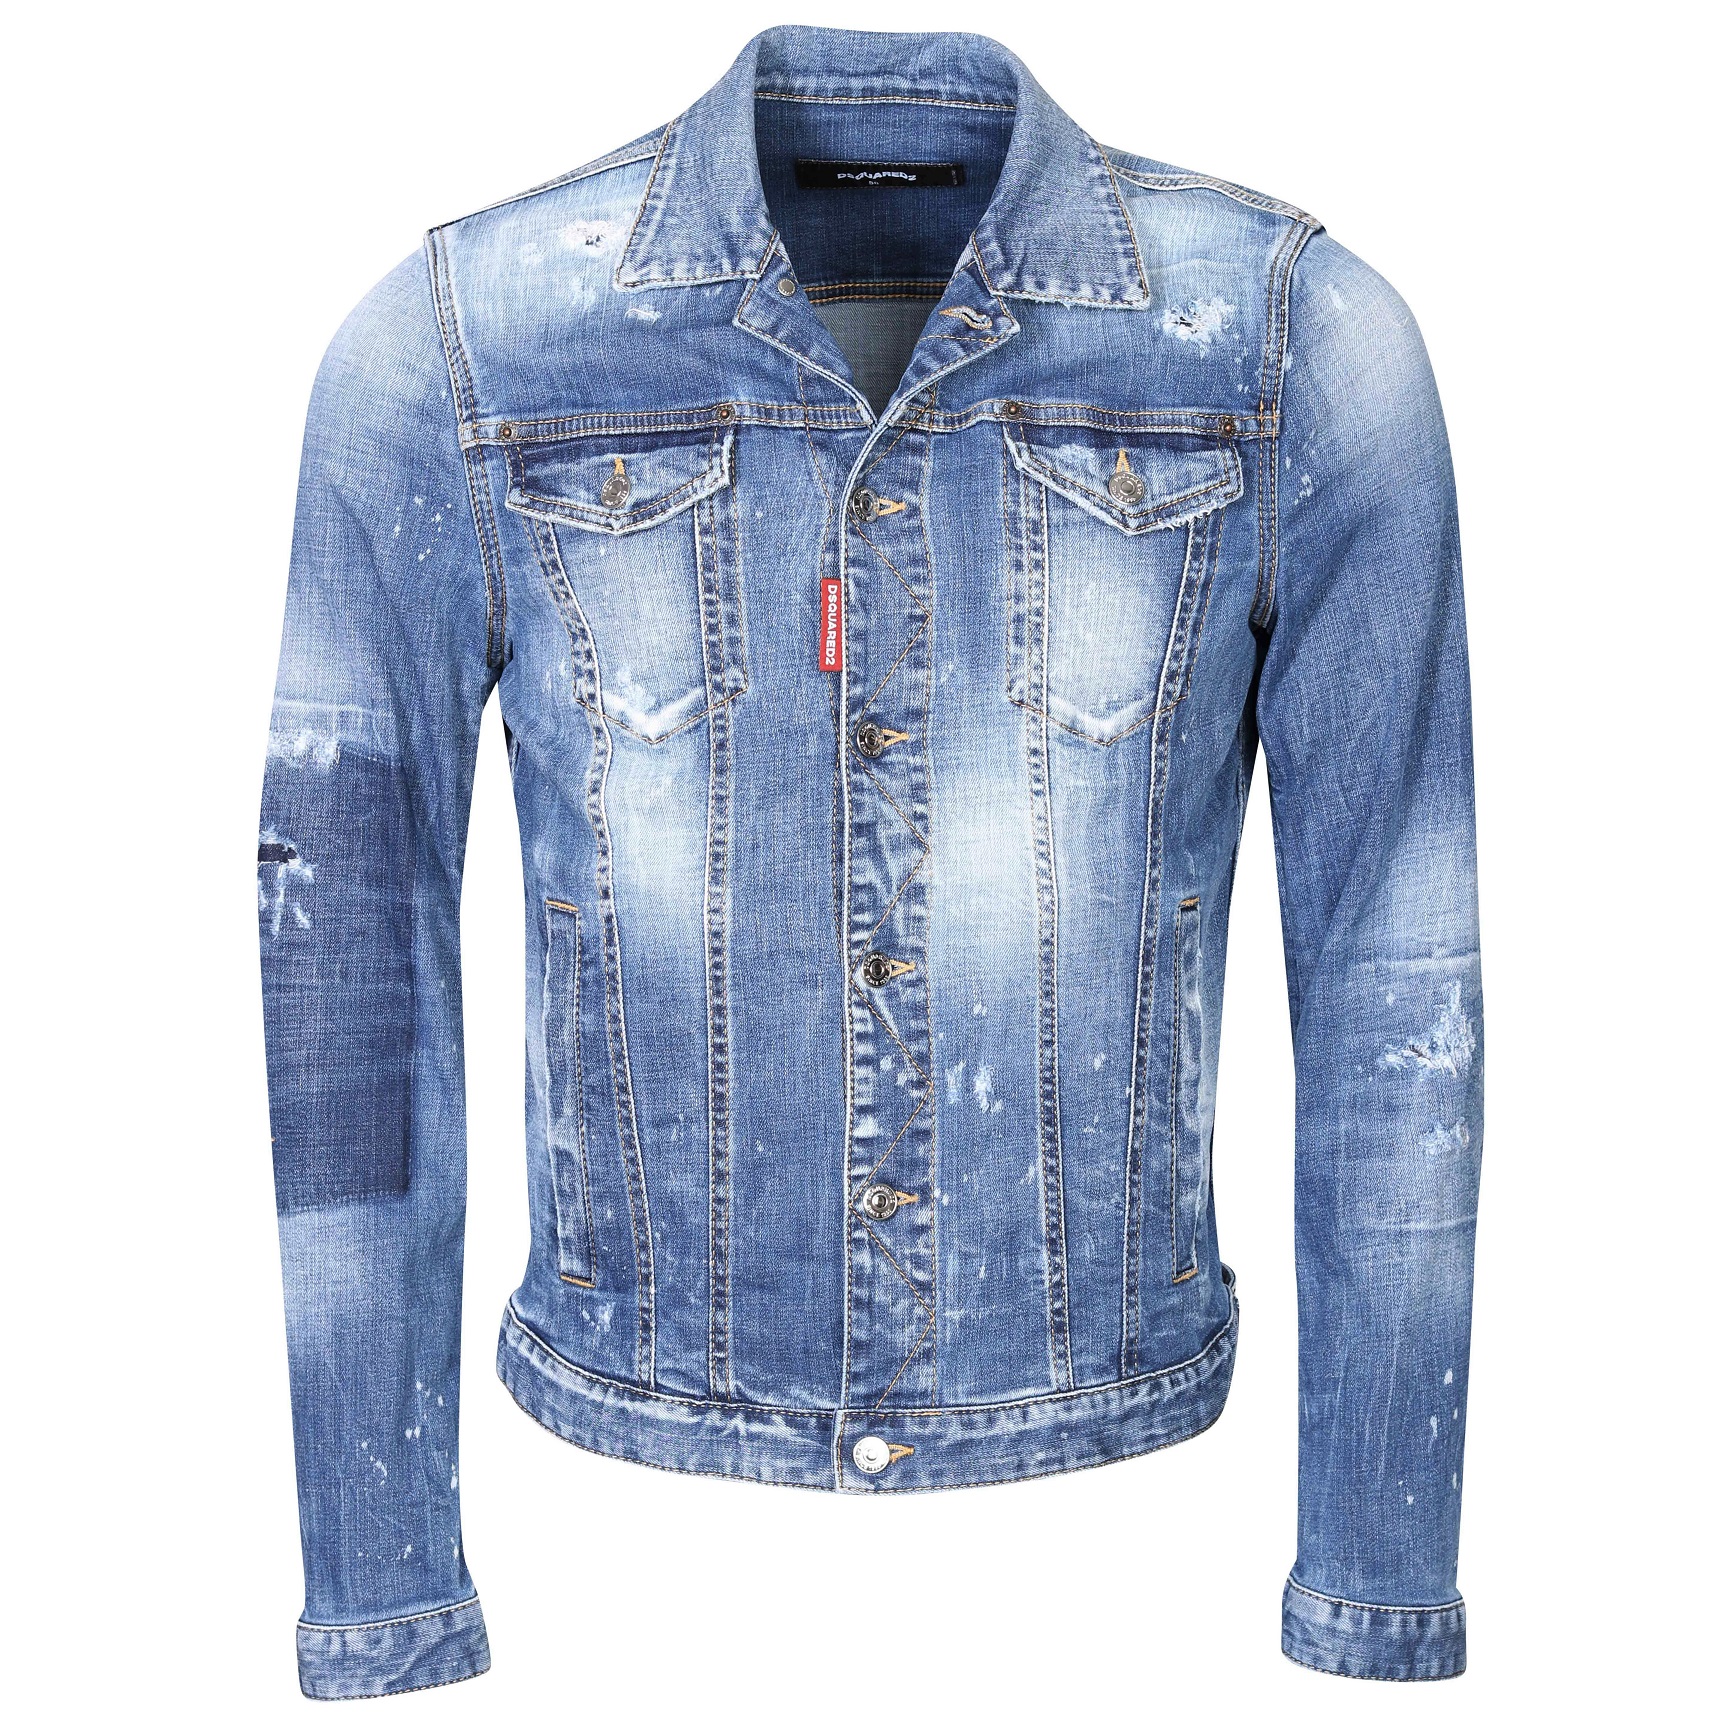 DSQUARED2 Classic Denim Jacket in Washed Light Blue 52